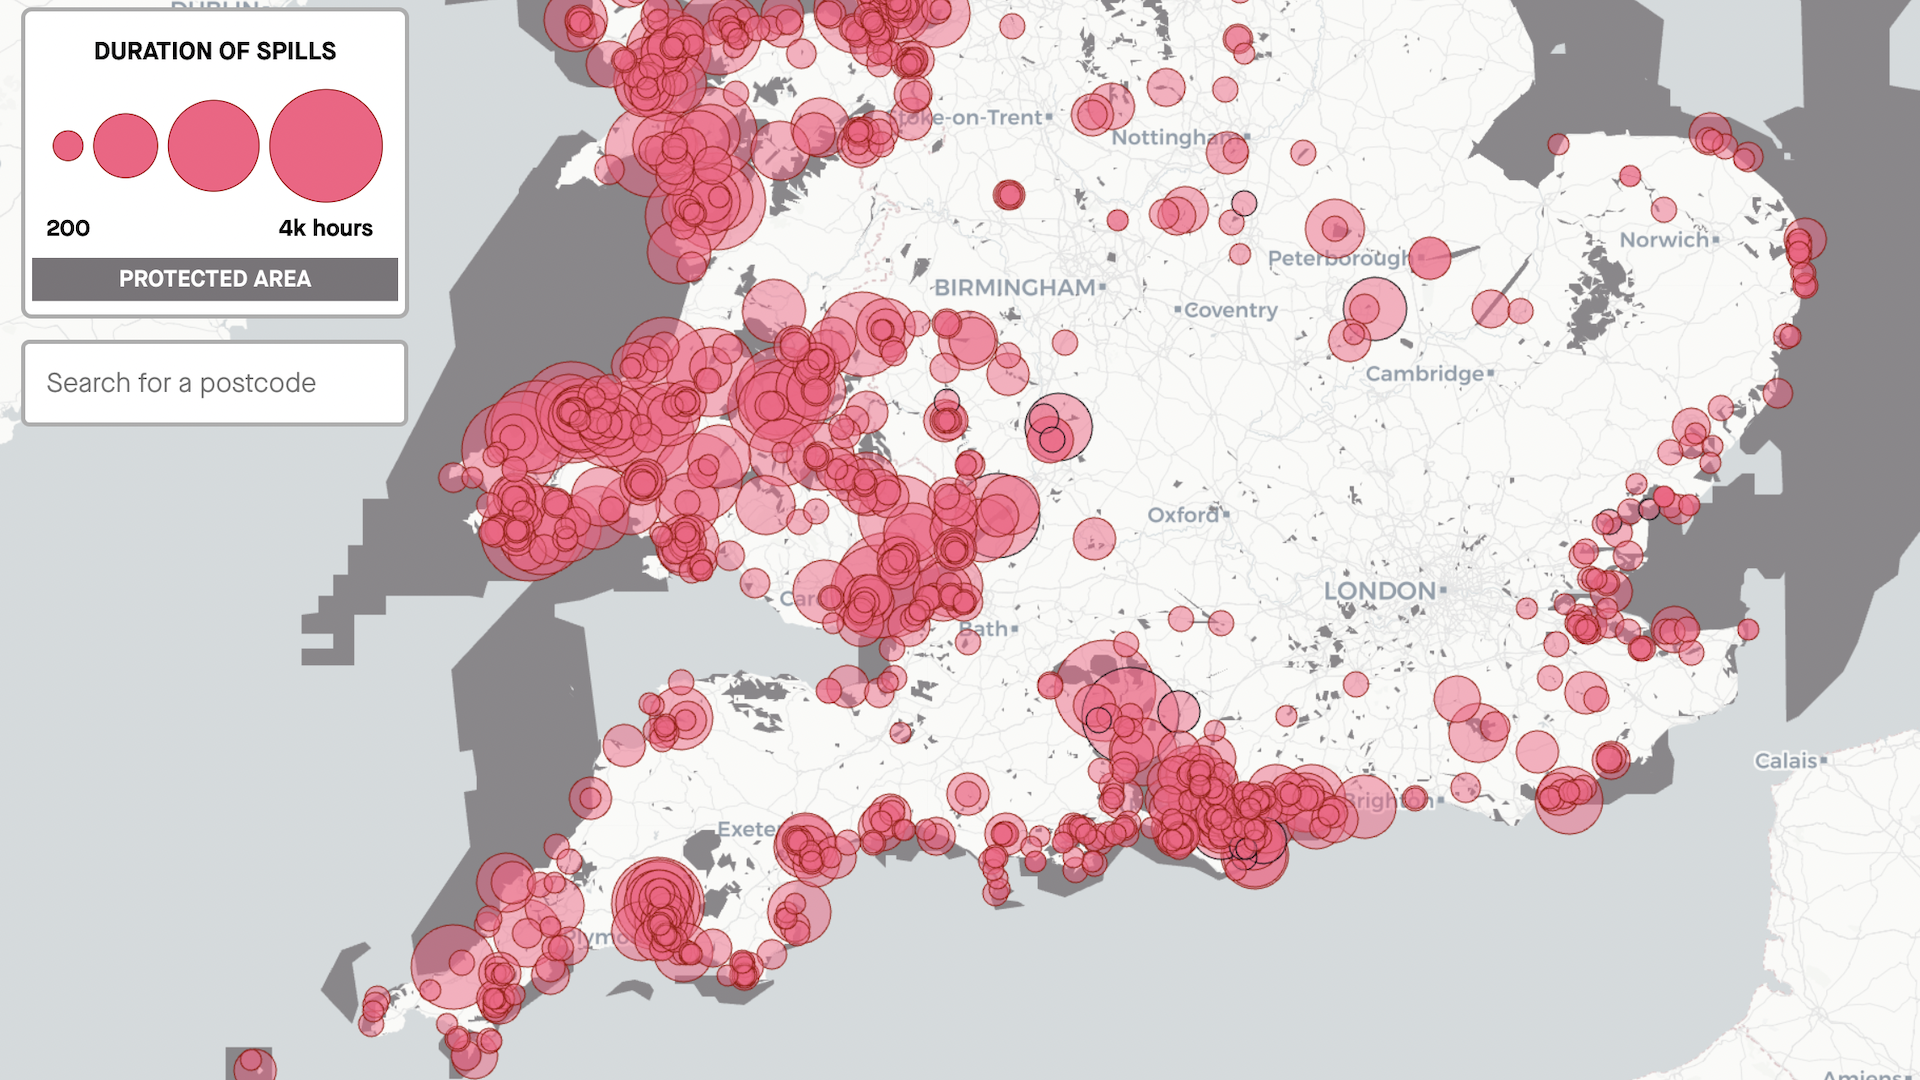 Red dots across a map of England and Wales show the breadth of sewage spills in protected areas